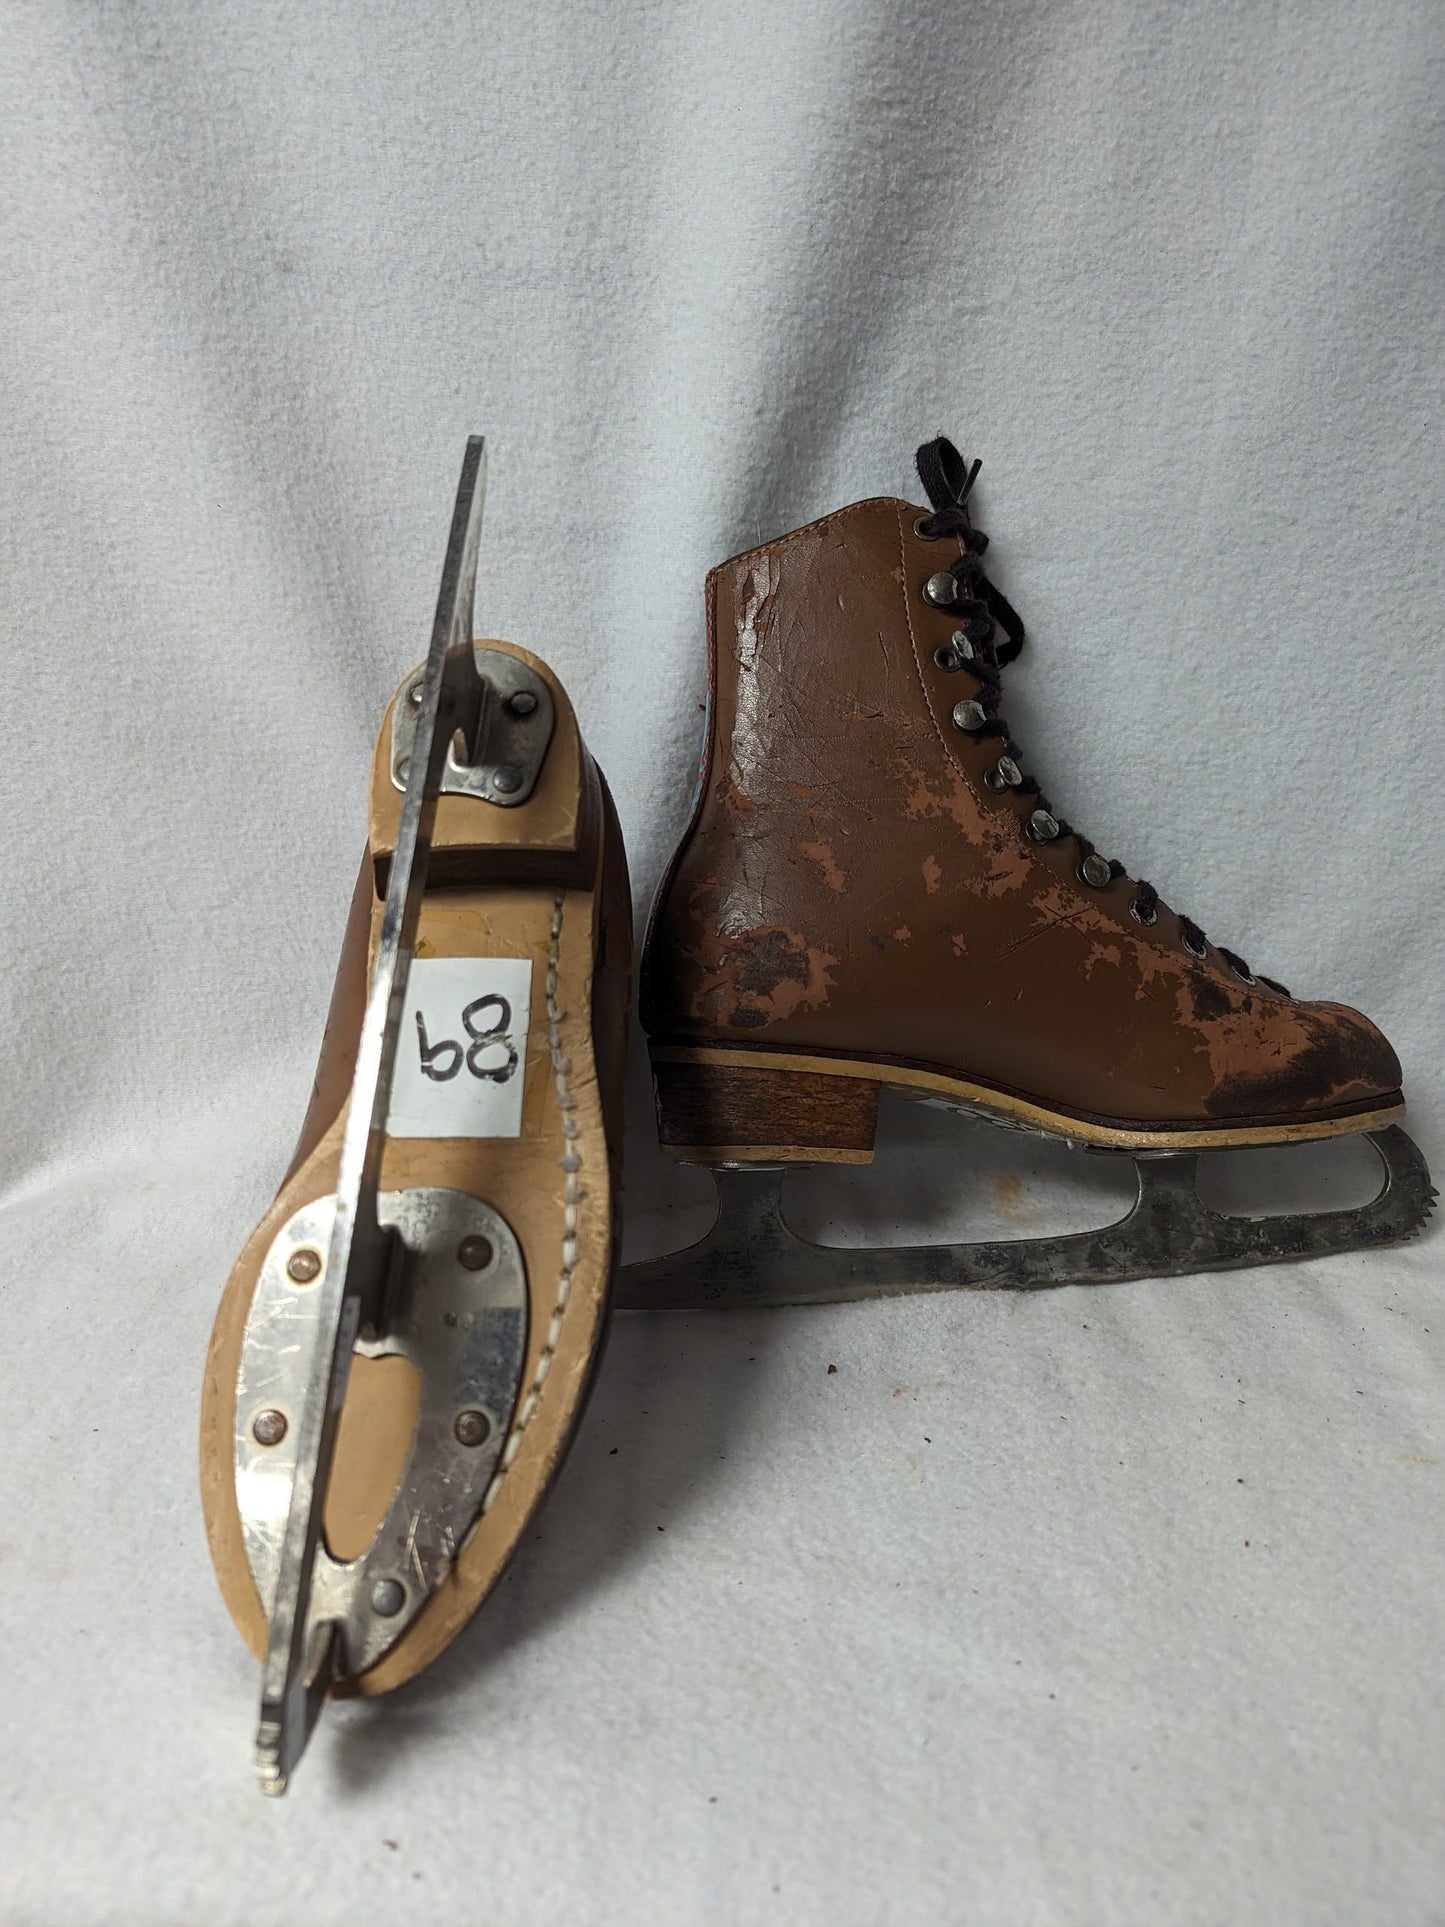 Rink Master Ice Skates Size 4 Color Brown Condition Used